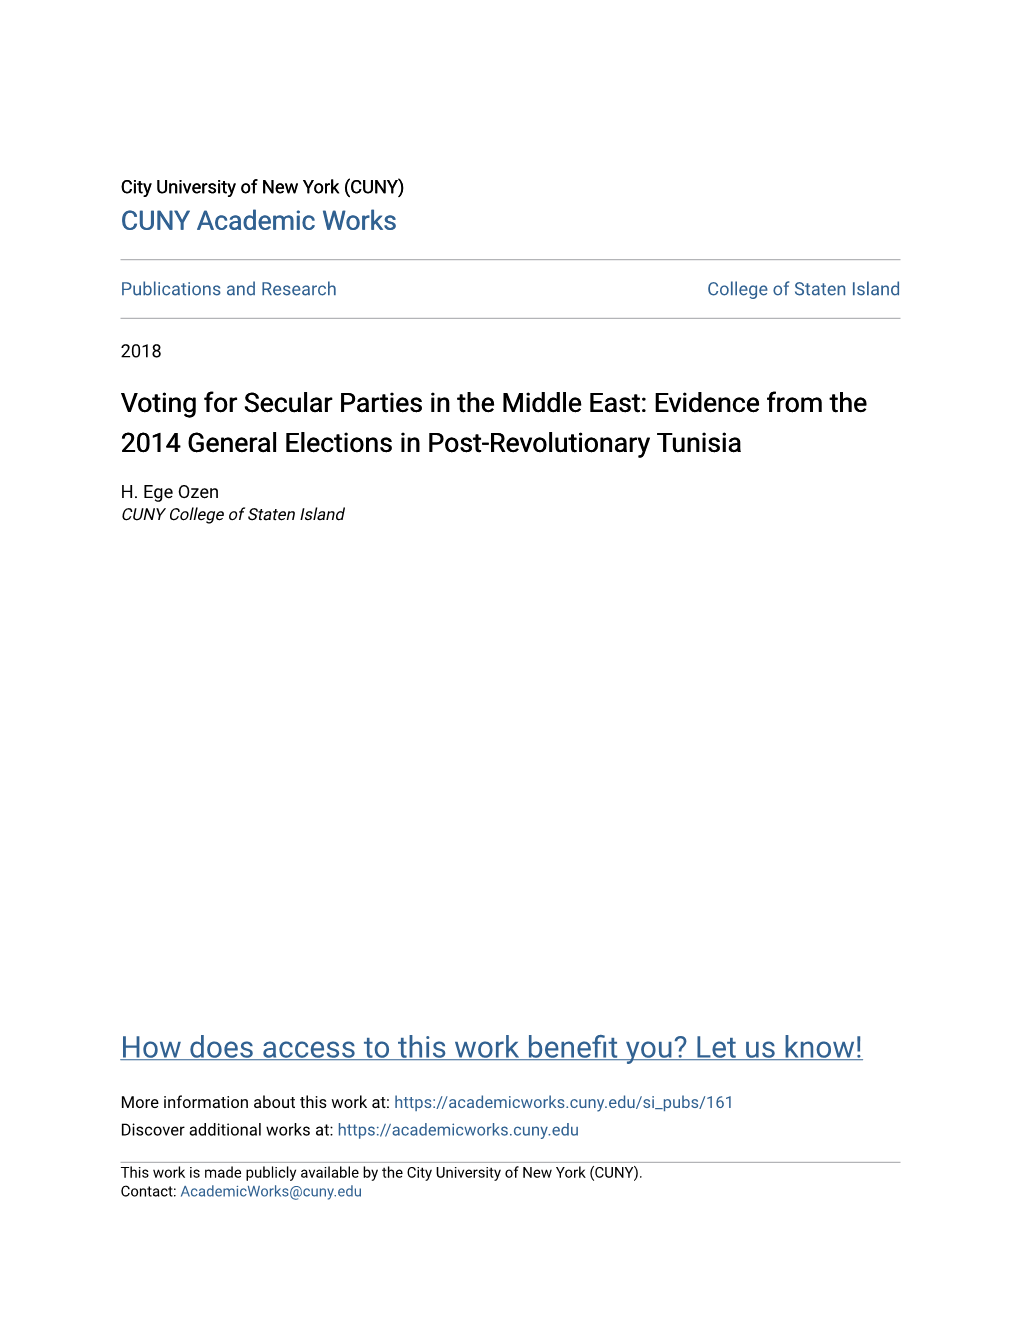 Voting for Secular Parties in the Middle East: Evidence from the 2014 General Elections in Post-Revolutionary Tunisia